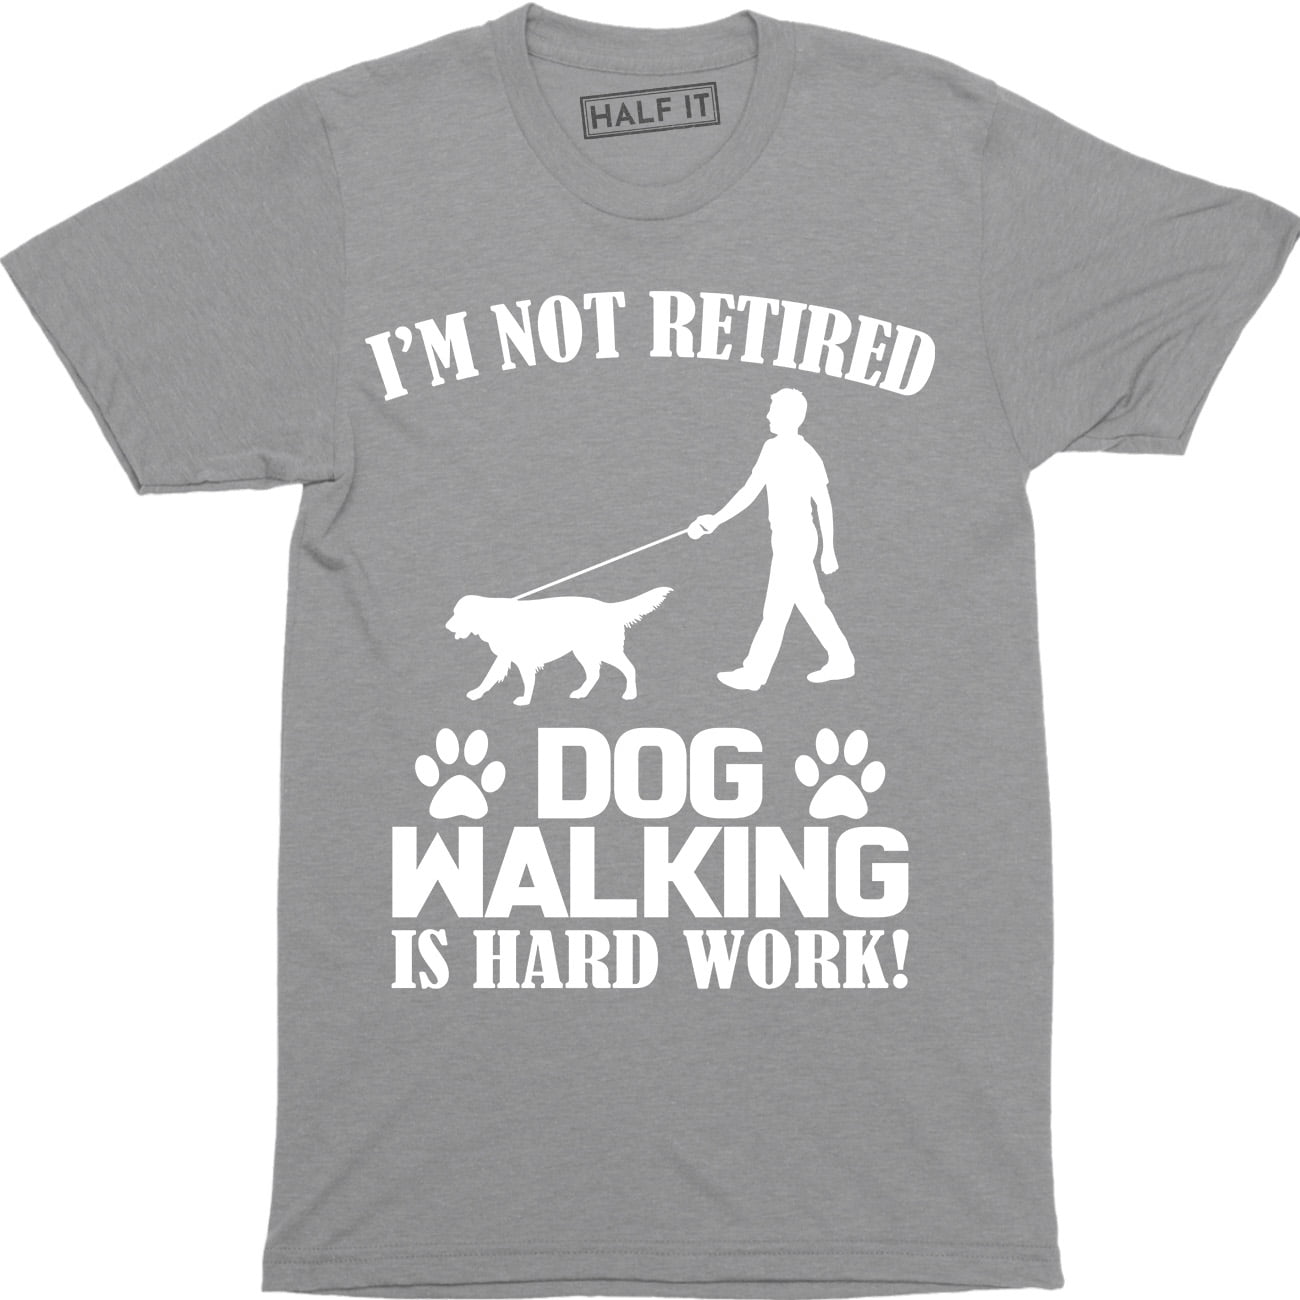 Run with The Big Dogs T-Shirt 6X / Gray Heather